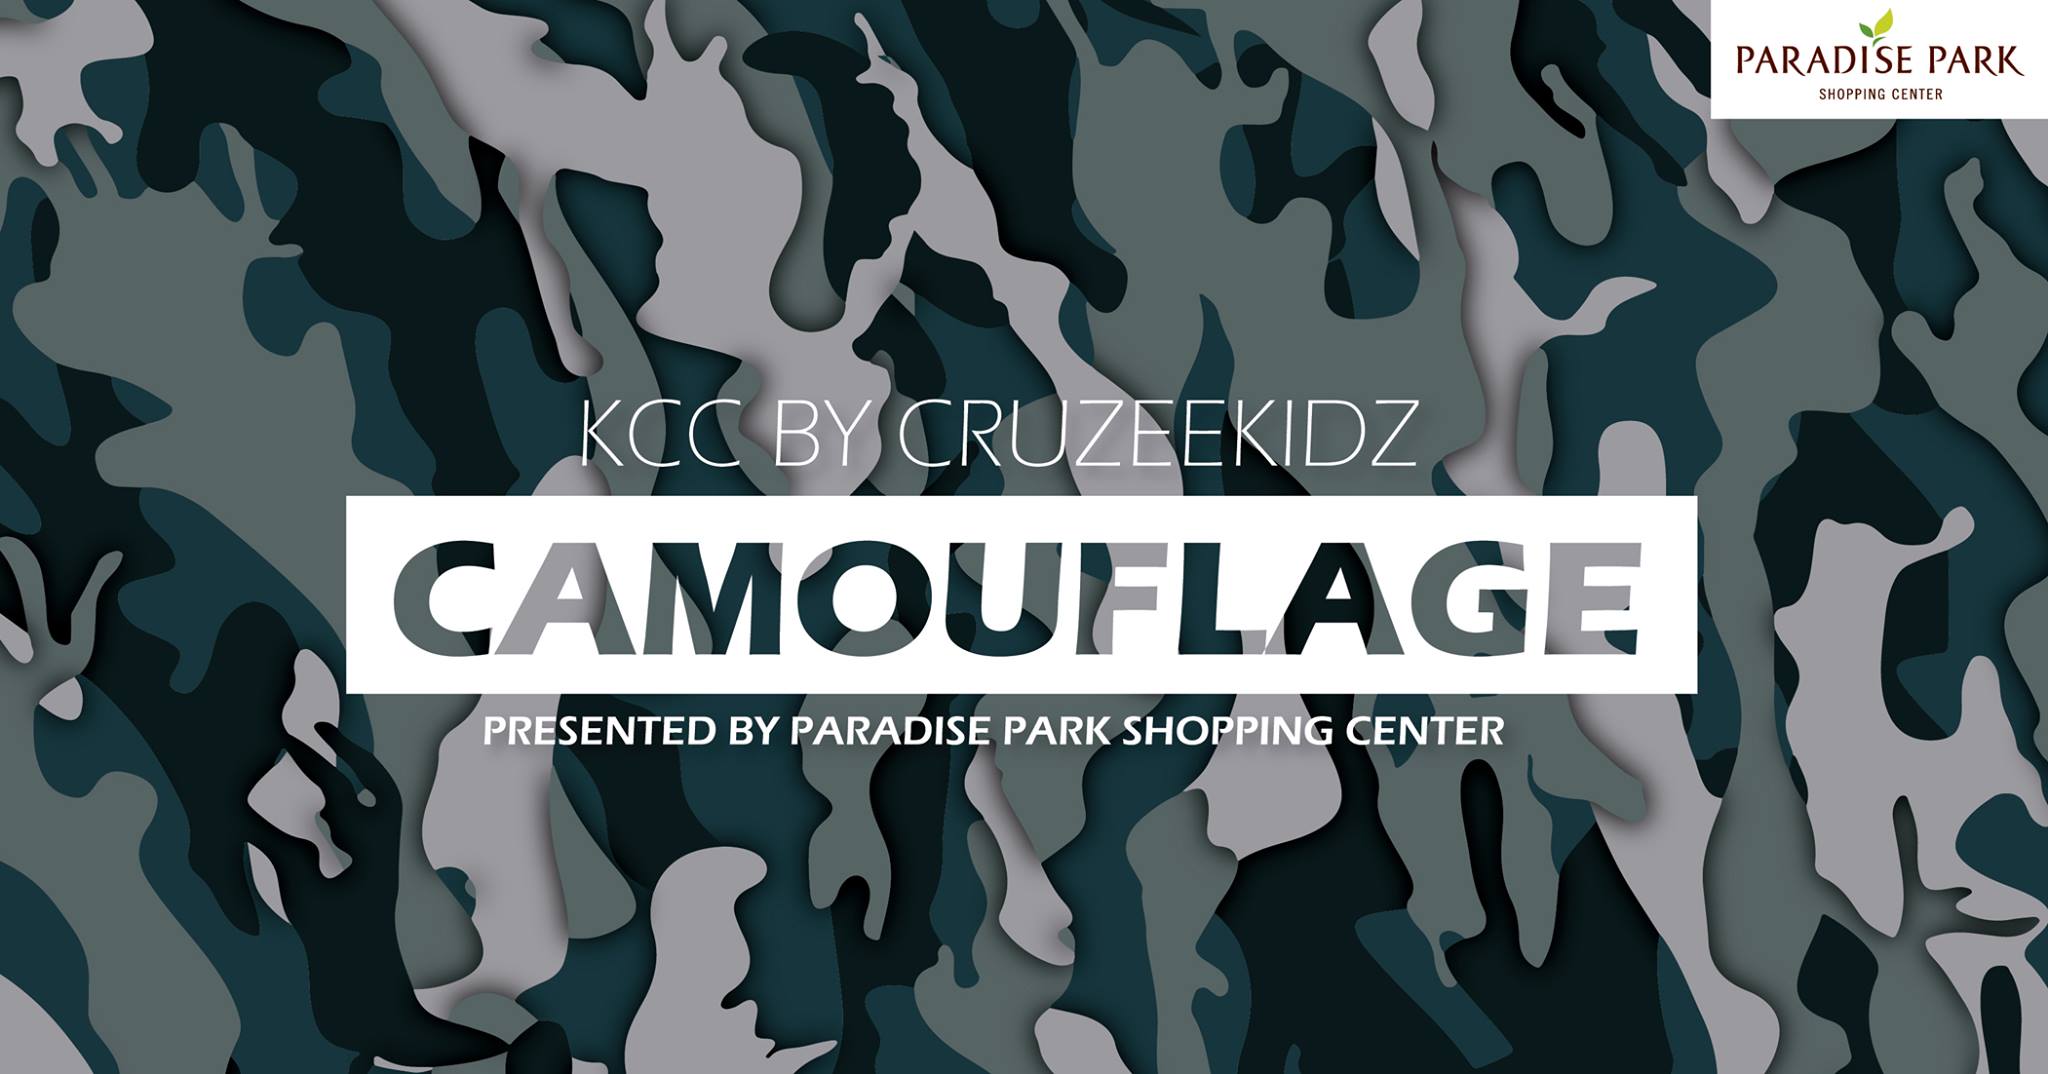 Kcc Camouflage presented by Paradise Park